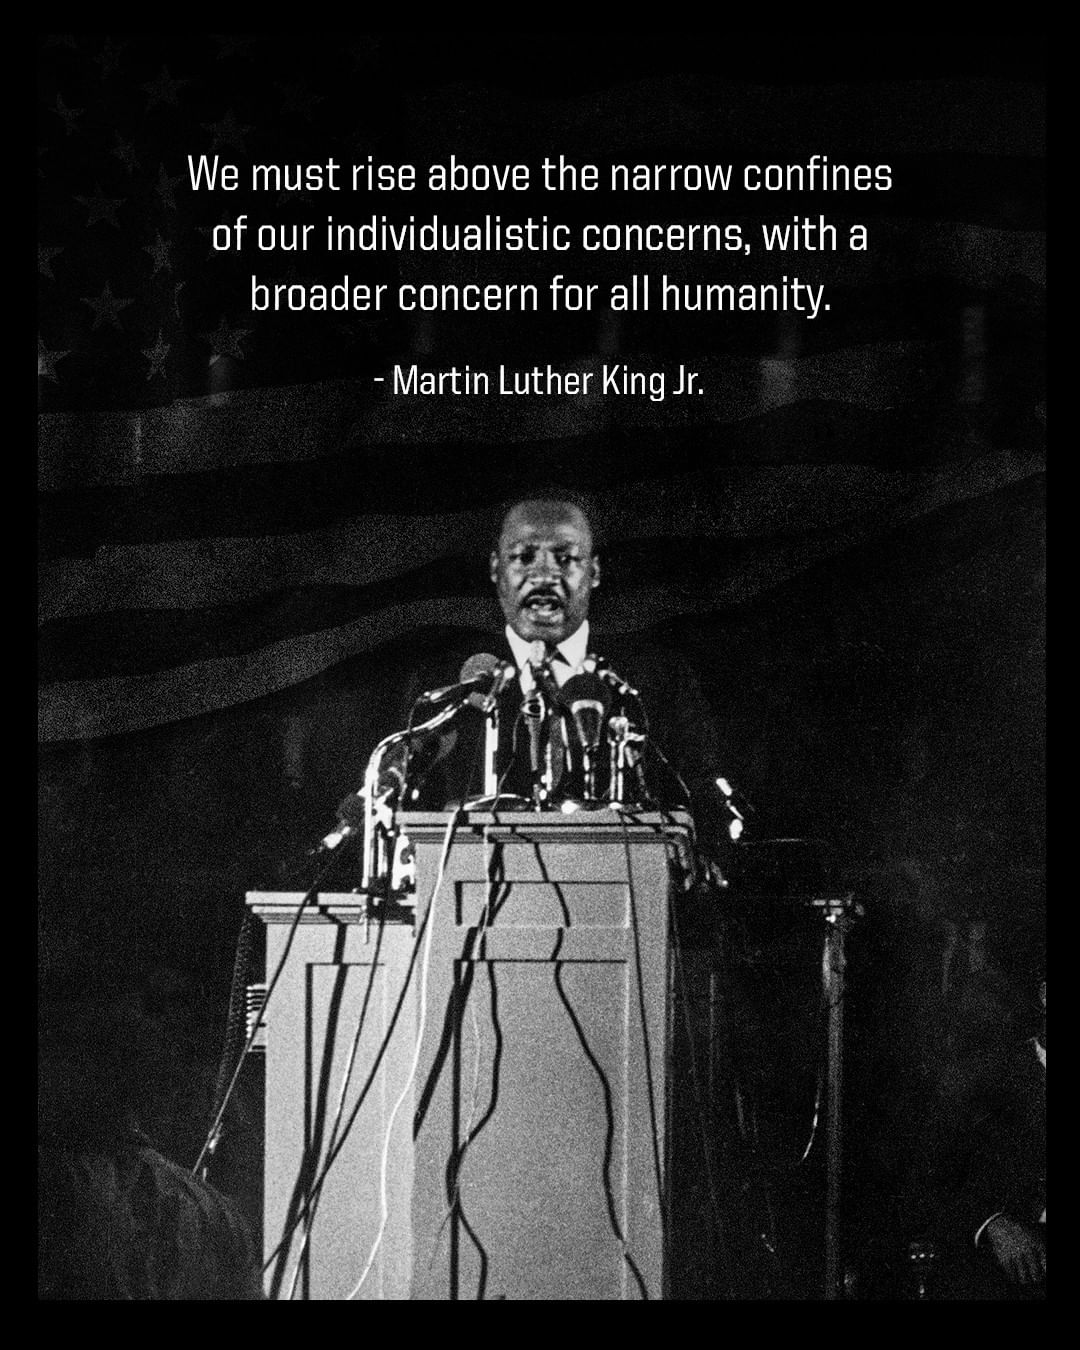 Today we celebrate the life and legacy of Dr. Martin Luther King Jr....